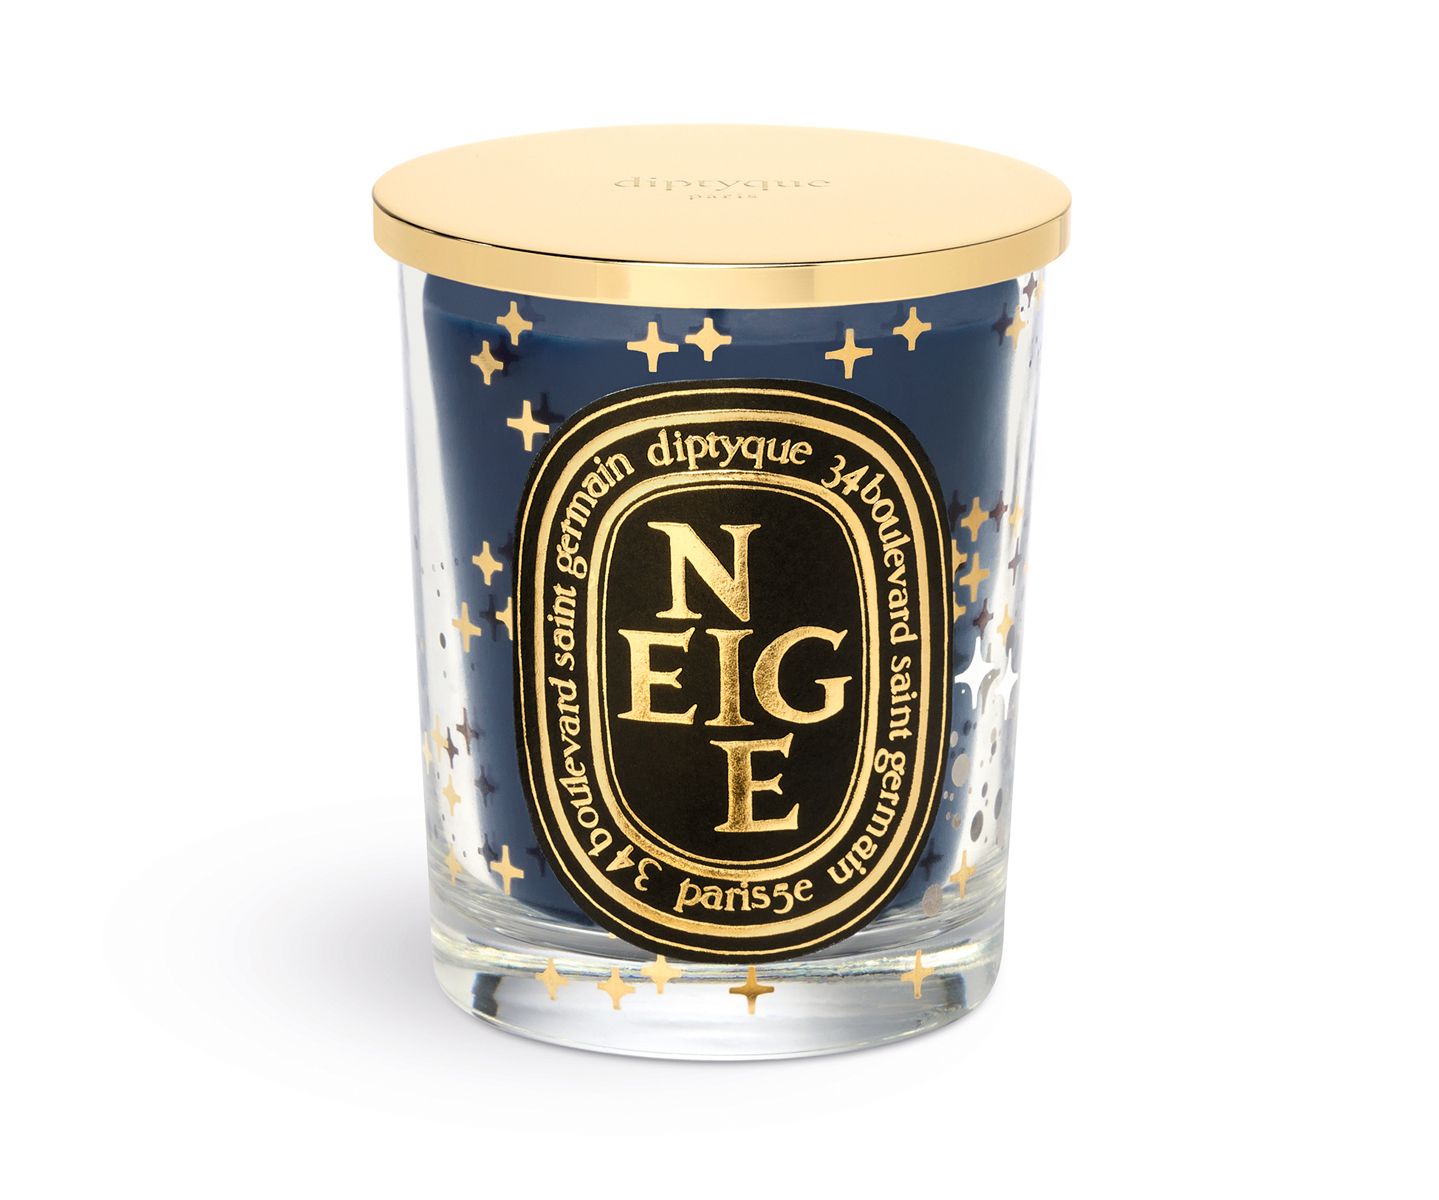 Snow / Neige candle 190g – Limited Edition | diptyque (US)